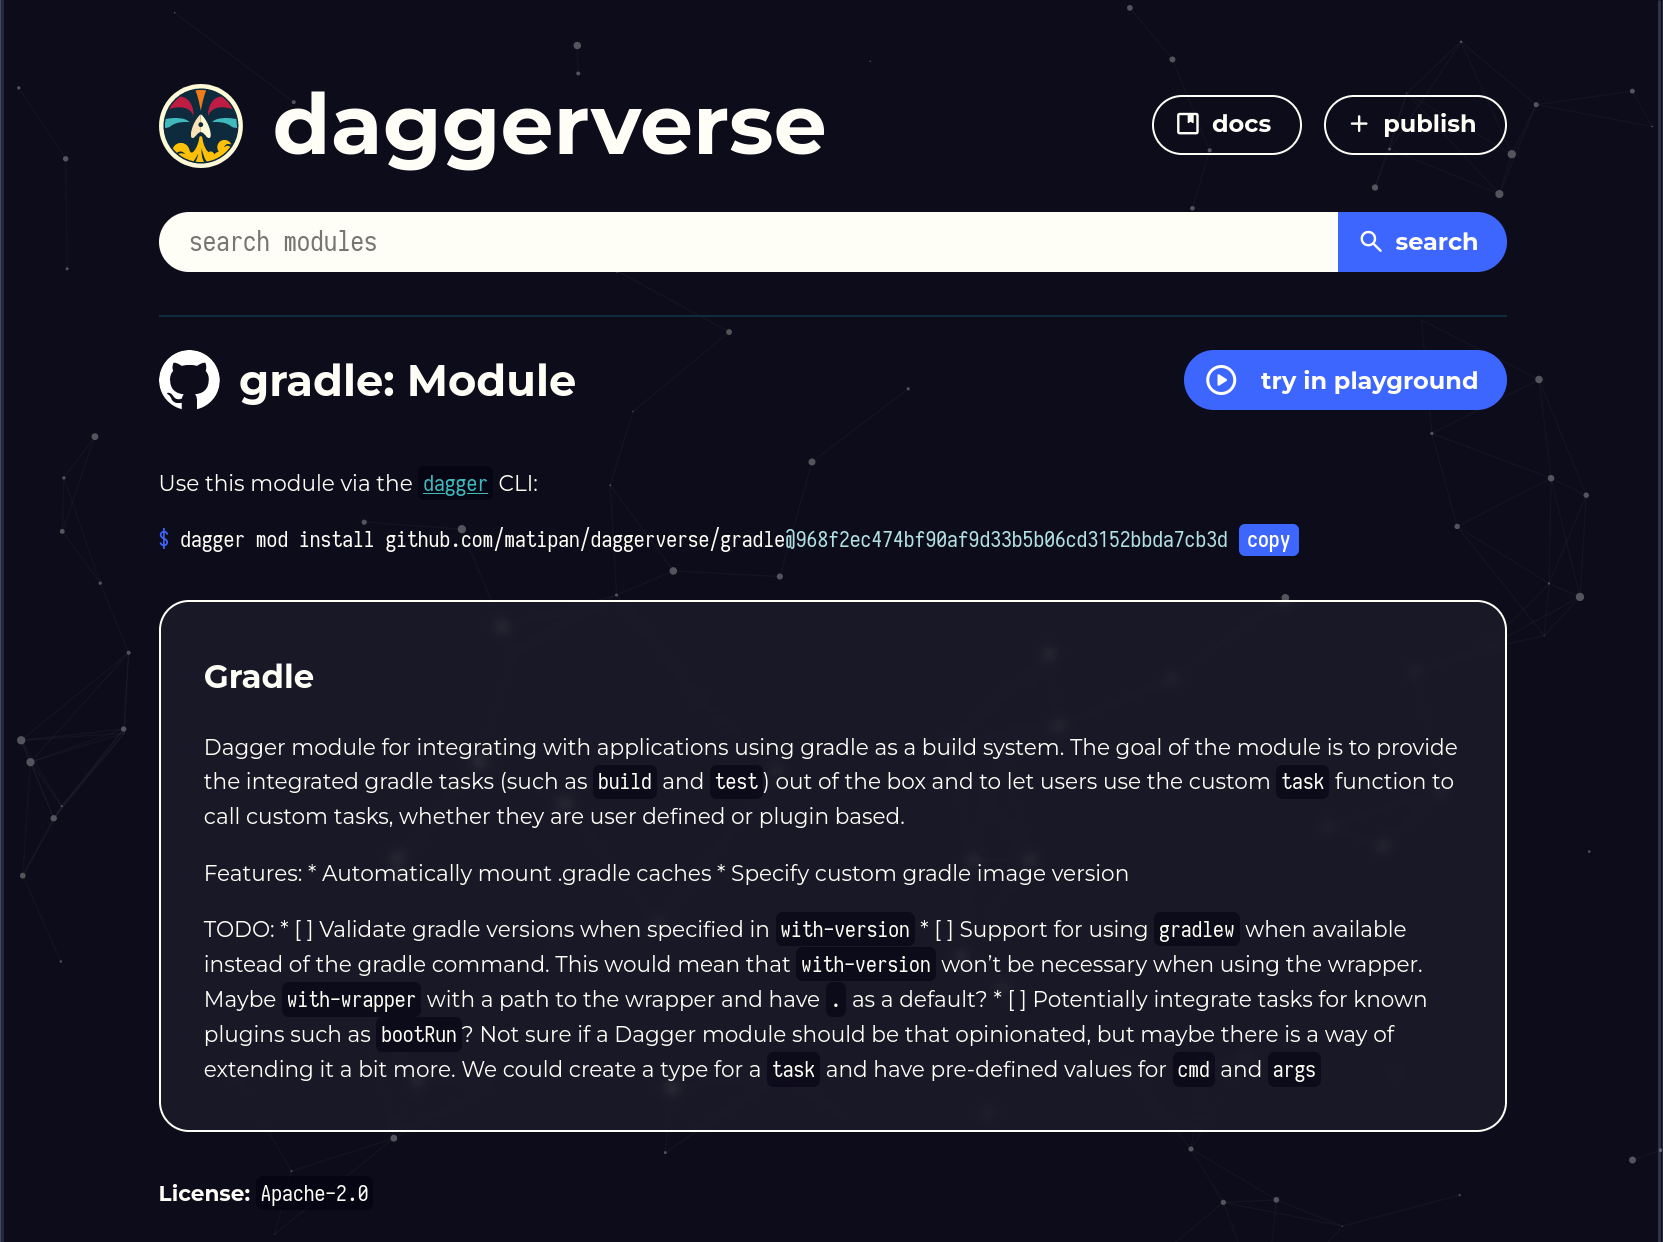 screenshot of the daggerverse showing a module for running gradle commands